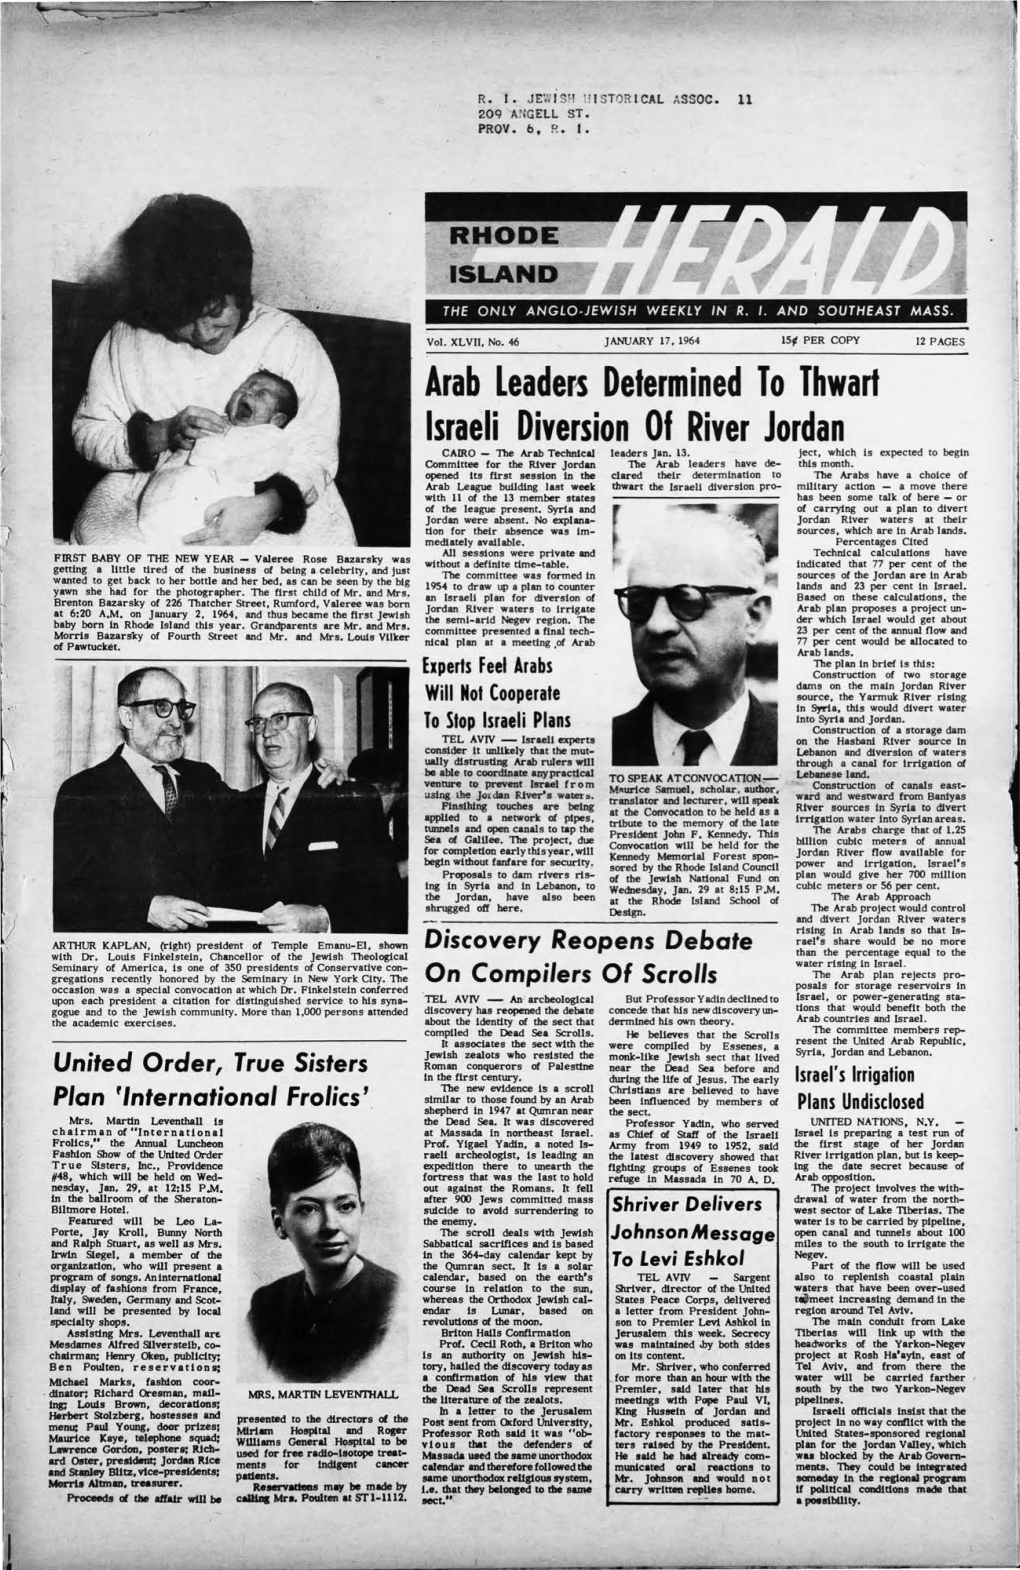 JANUARY 17, 1964 15¢ PER COPY 12 PAGES Arab Leader,S Determined to Thwart Israeli Diversion of River Jordan CAIRO - the Arab Technical Leaders Jan